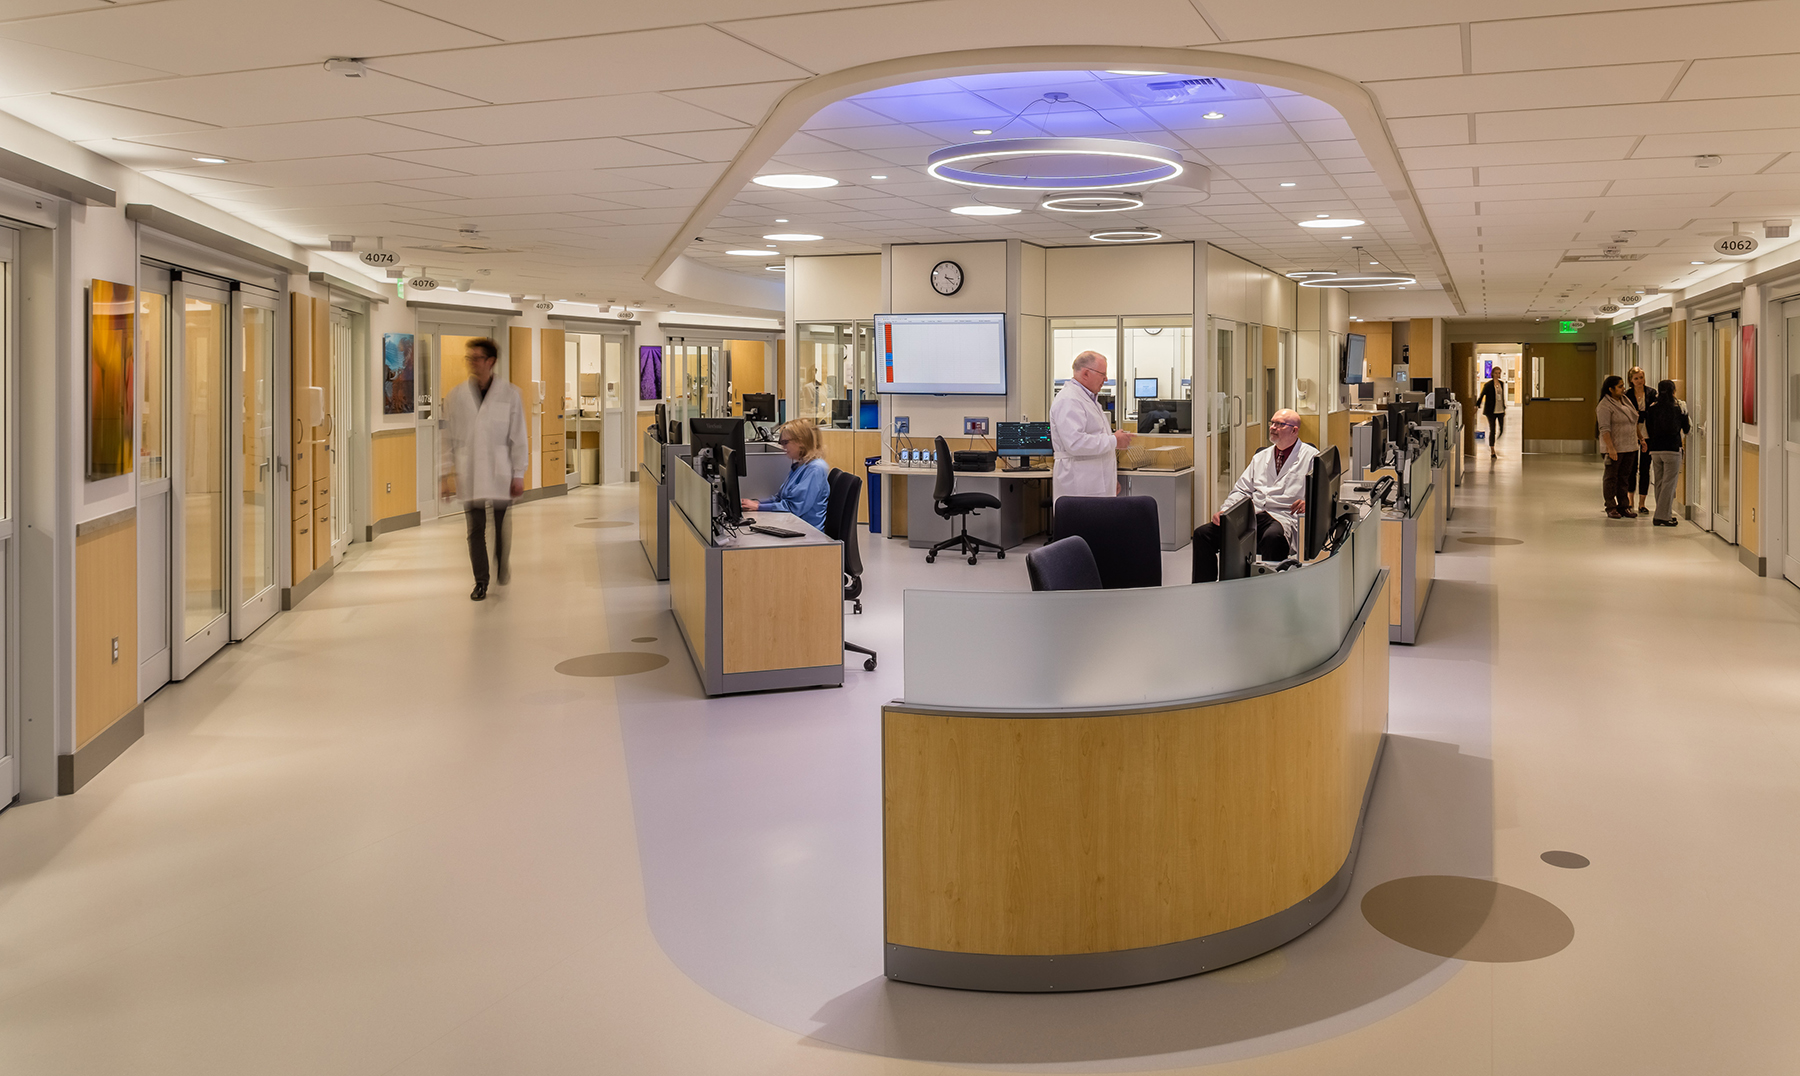  At EvergreenHealth Medical Center in Kirkland, Washington, lighting in the patient room corridor and nurse station is controlled in multiple zones to allow high light levels during the day and reduced light levels at night. Desk-specific lighting pr